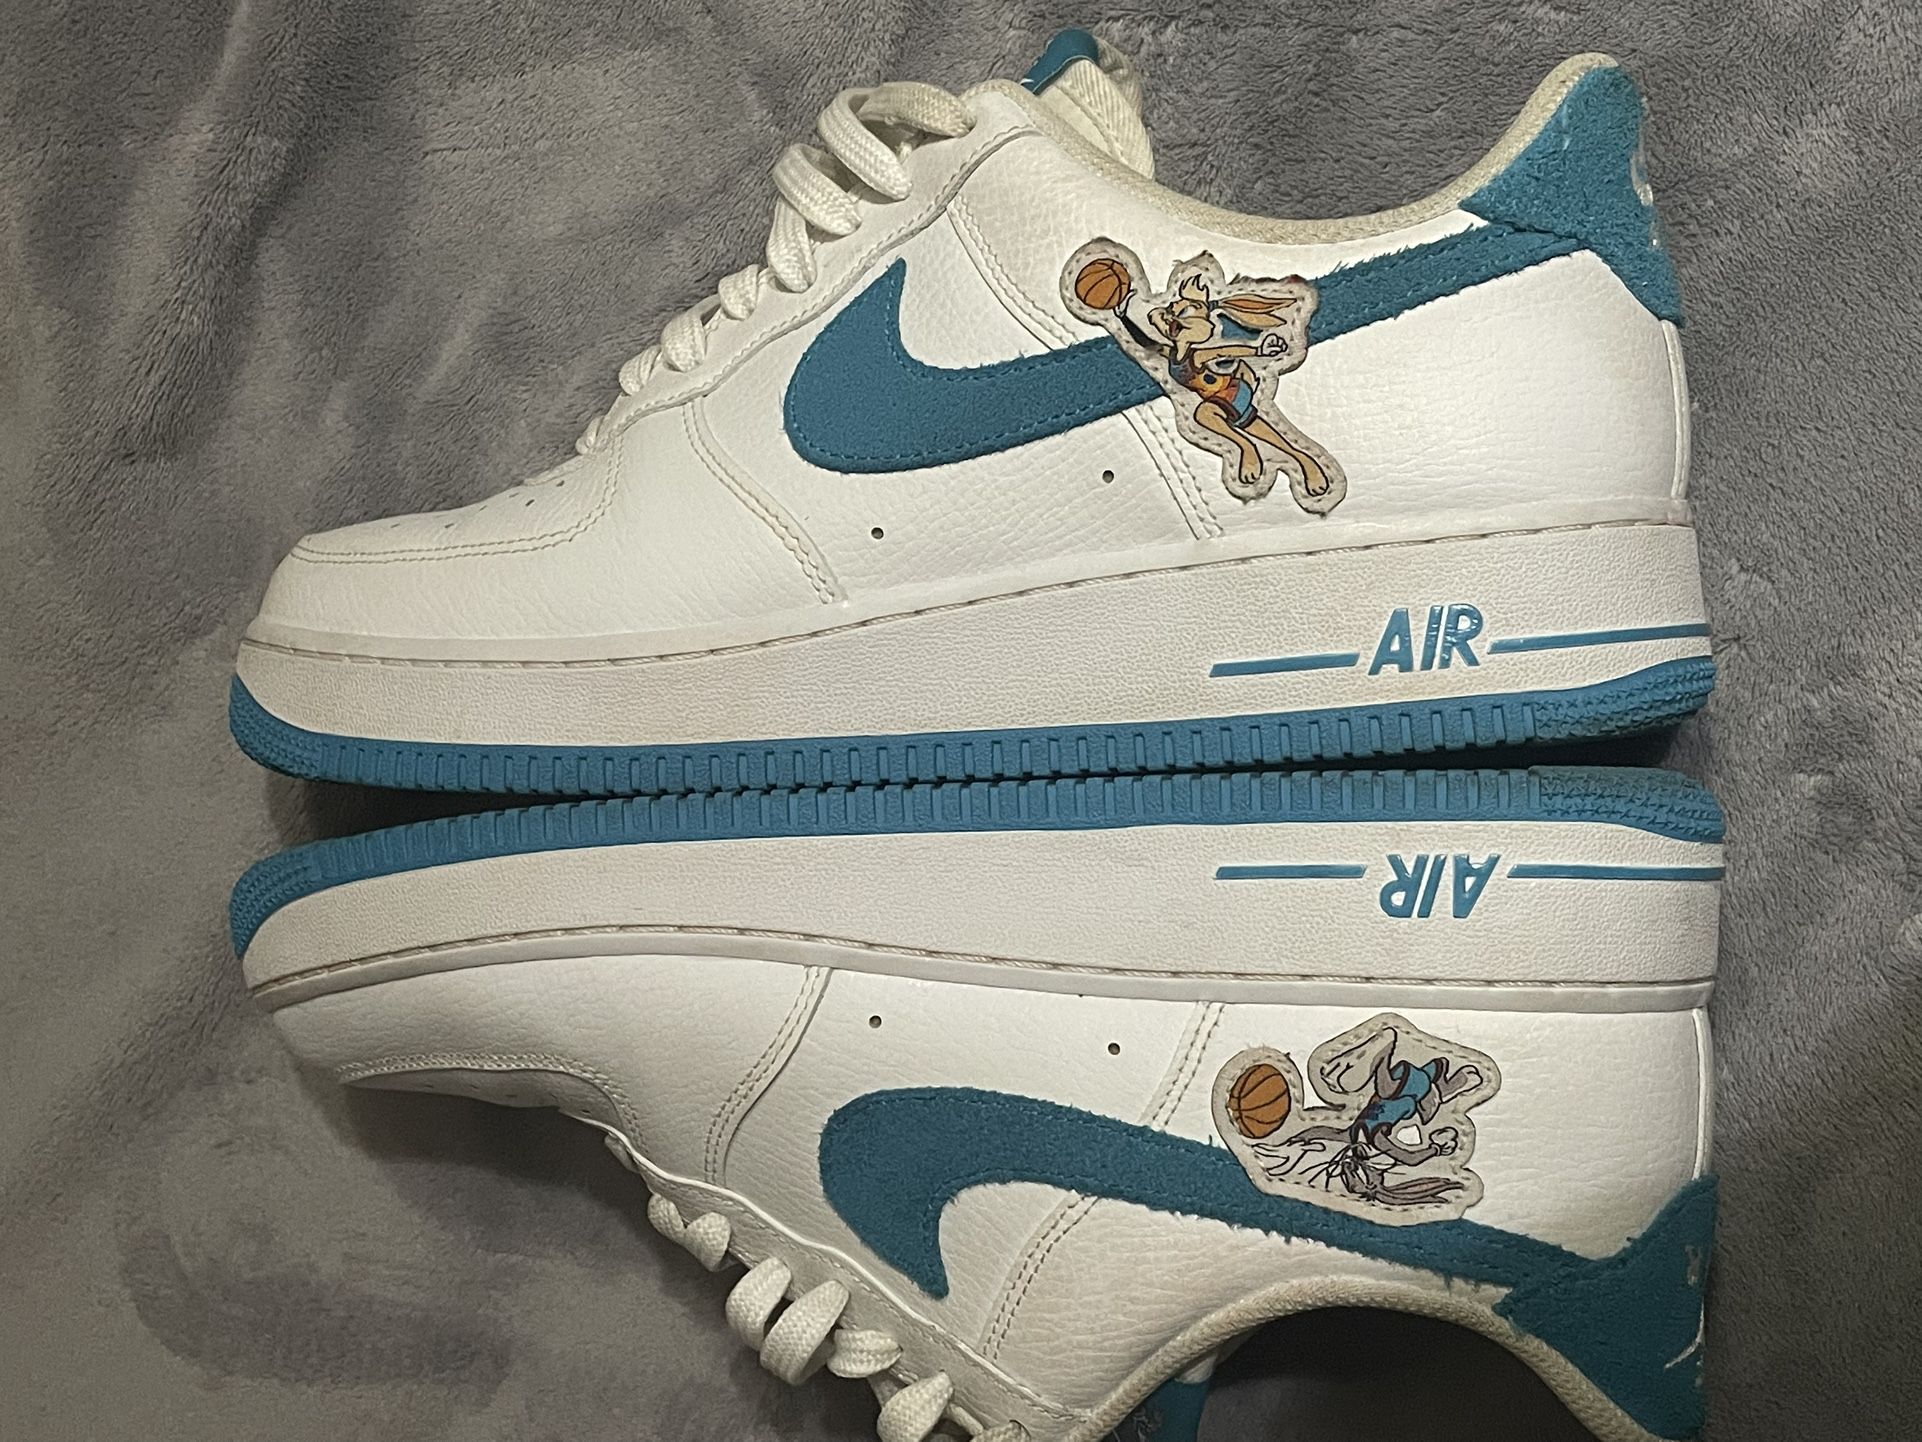 Space Jam X Air Force 1 ‘07’ Low  ‘Hare’ 